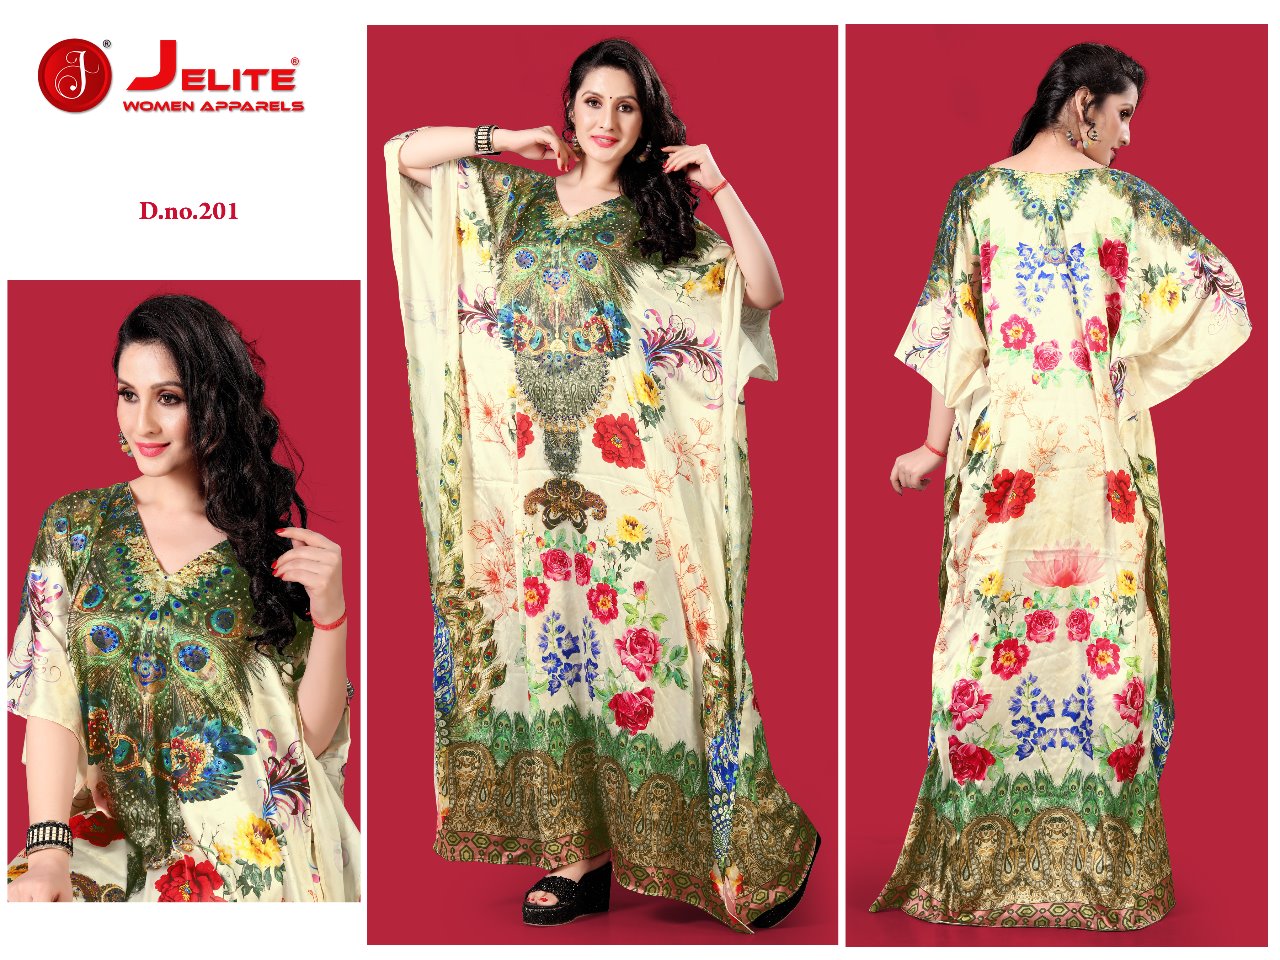 Jelite Kaftans gown nighty classic trendy look Gowns